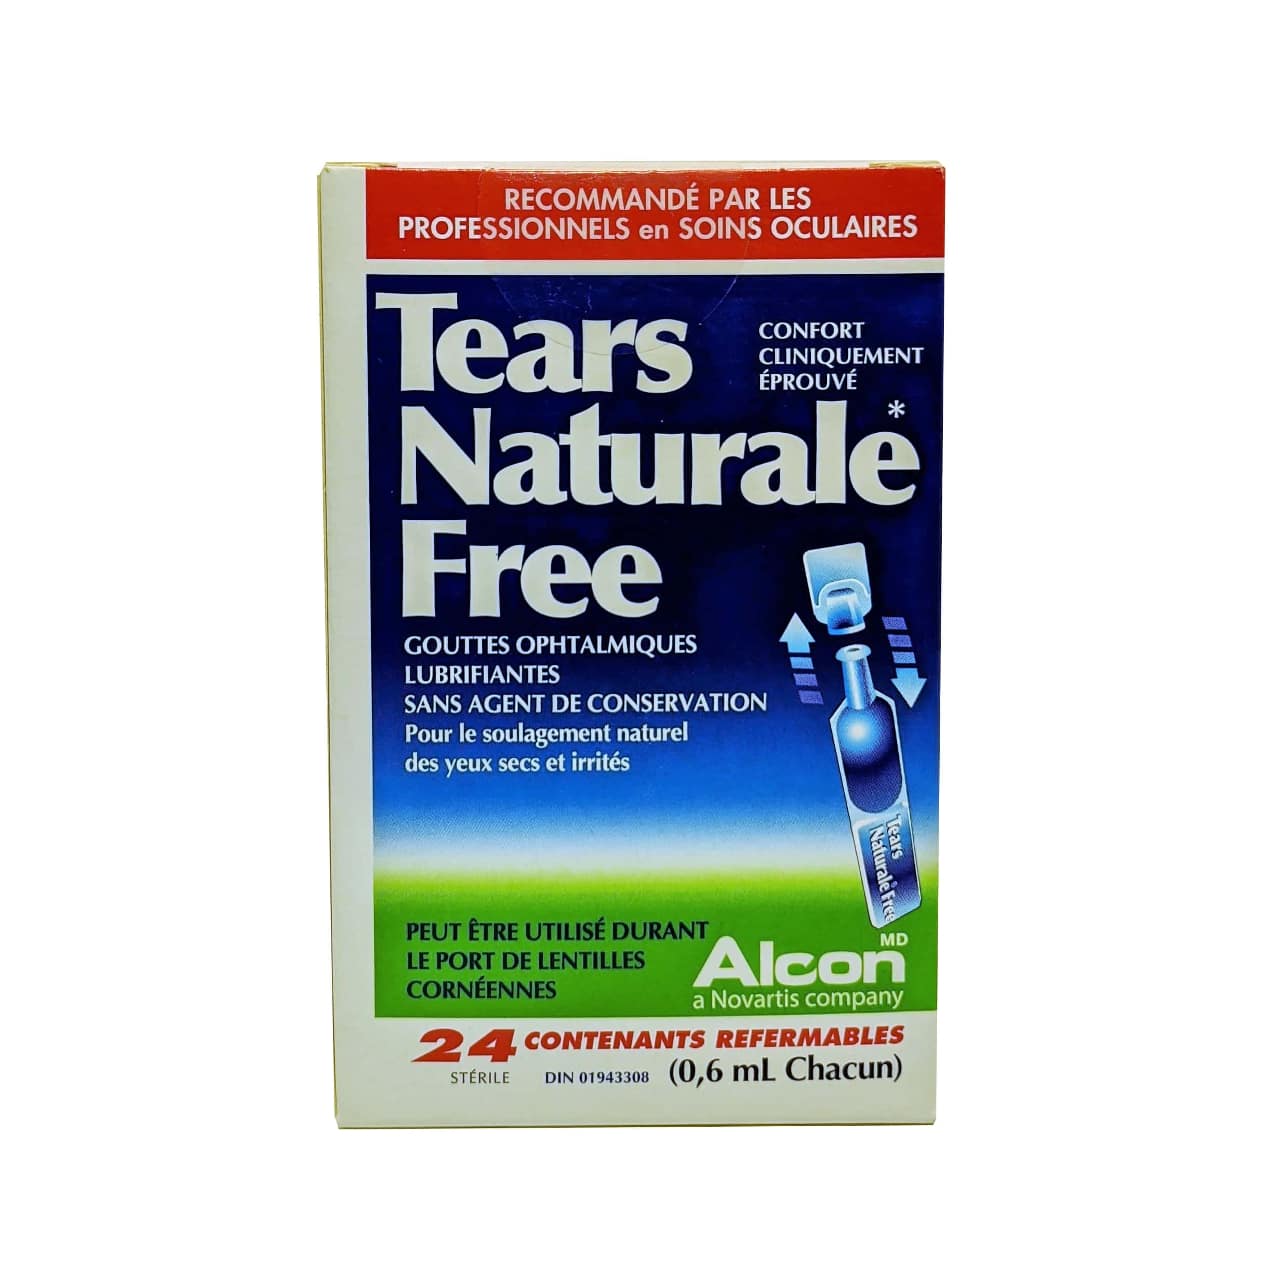 French product label for Alcon Tears Naturale Free Lubricant Eye Drops